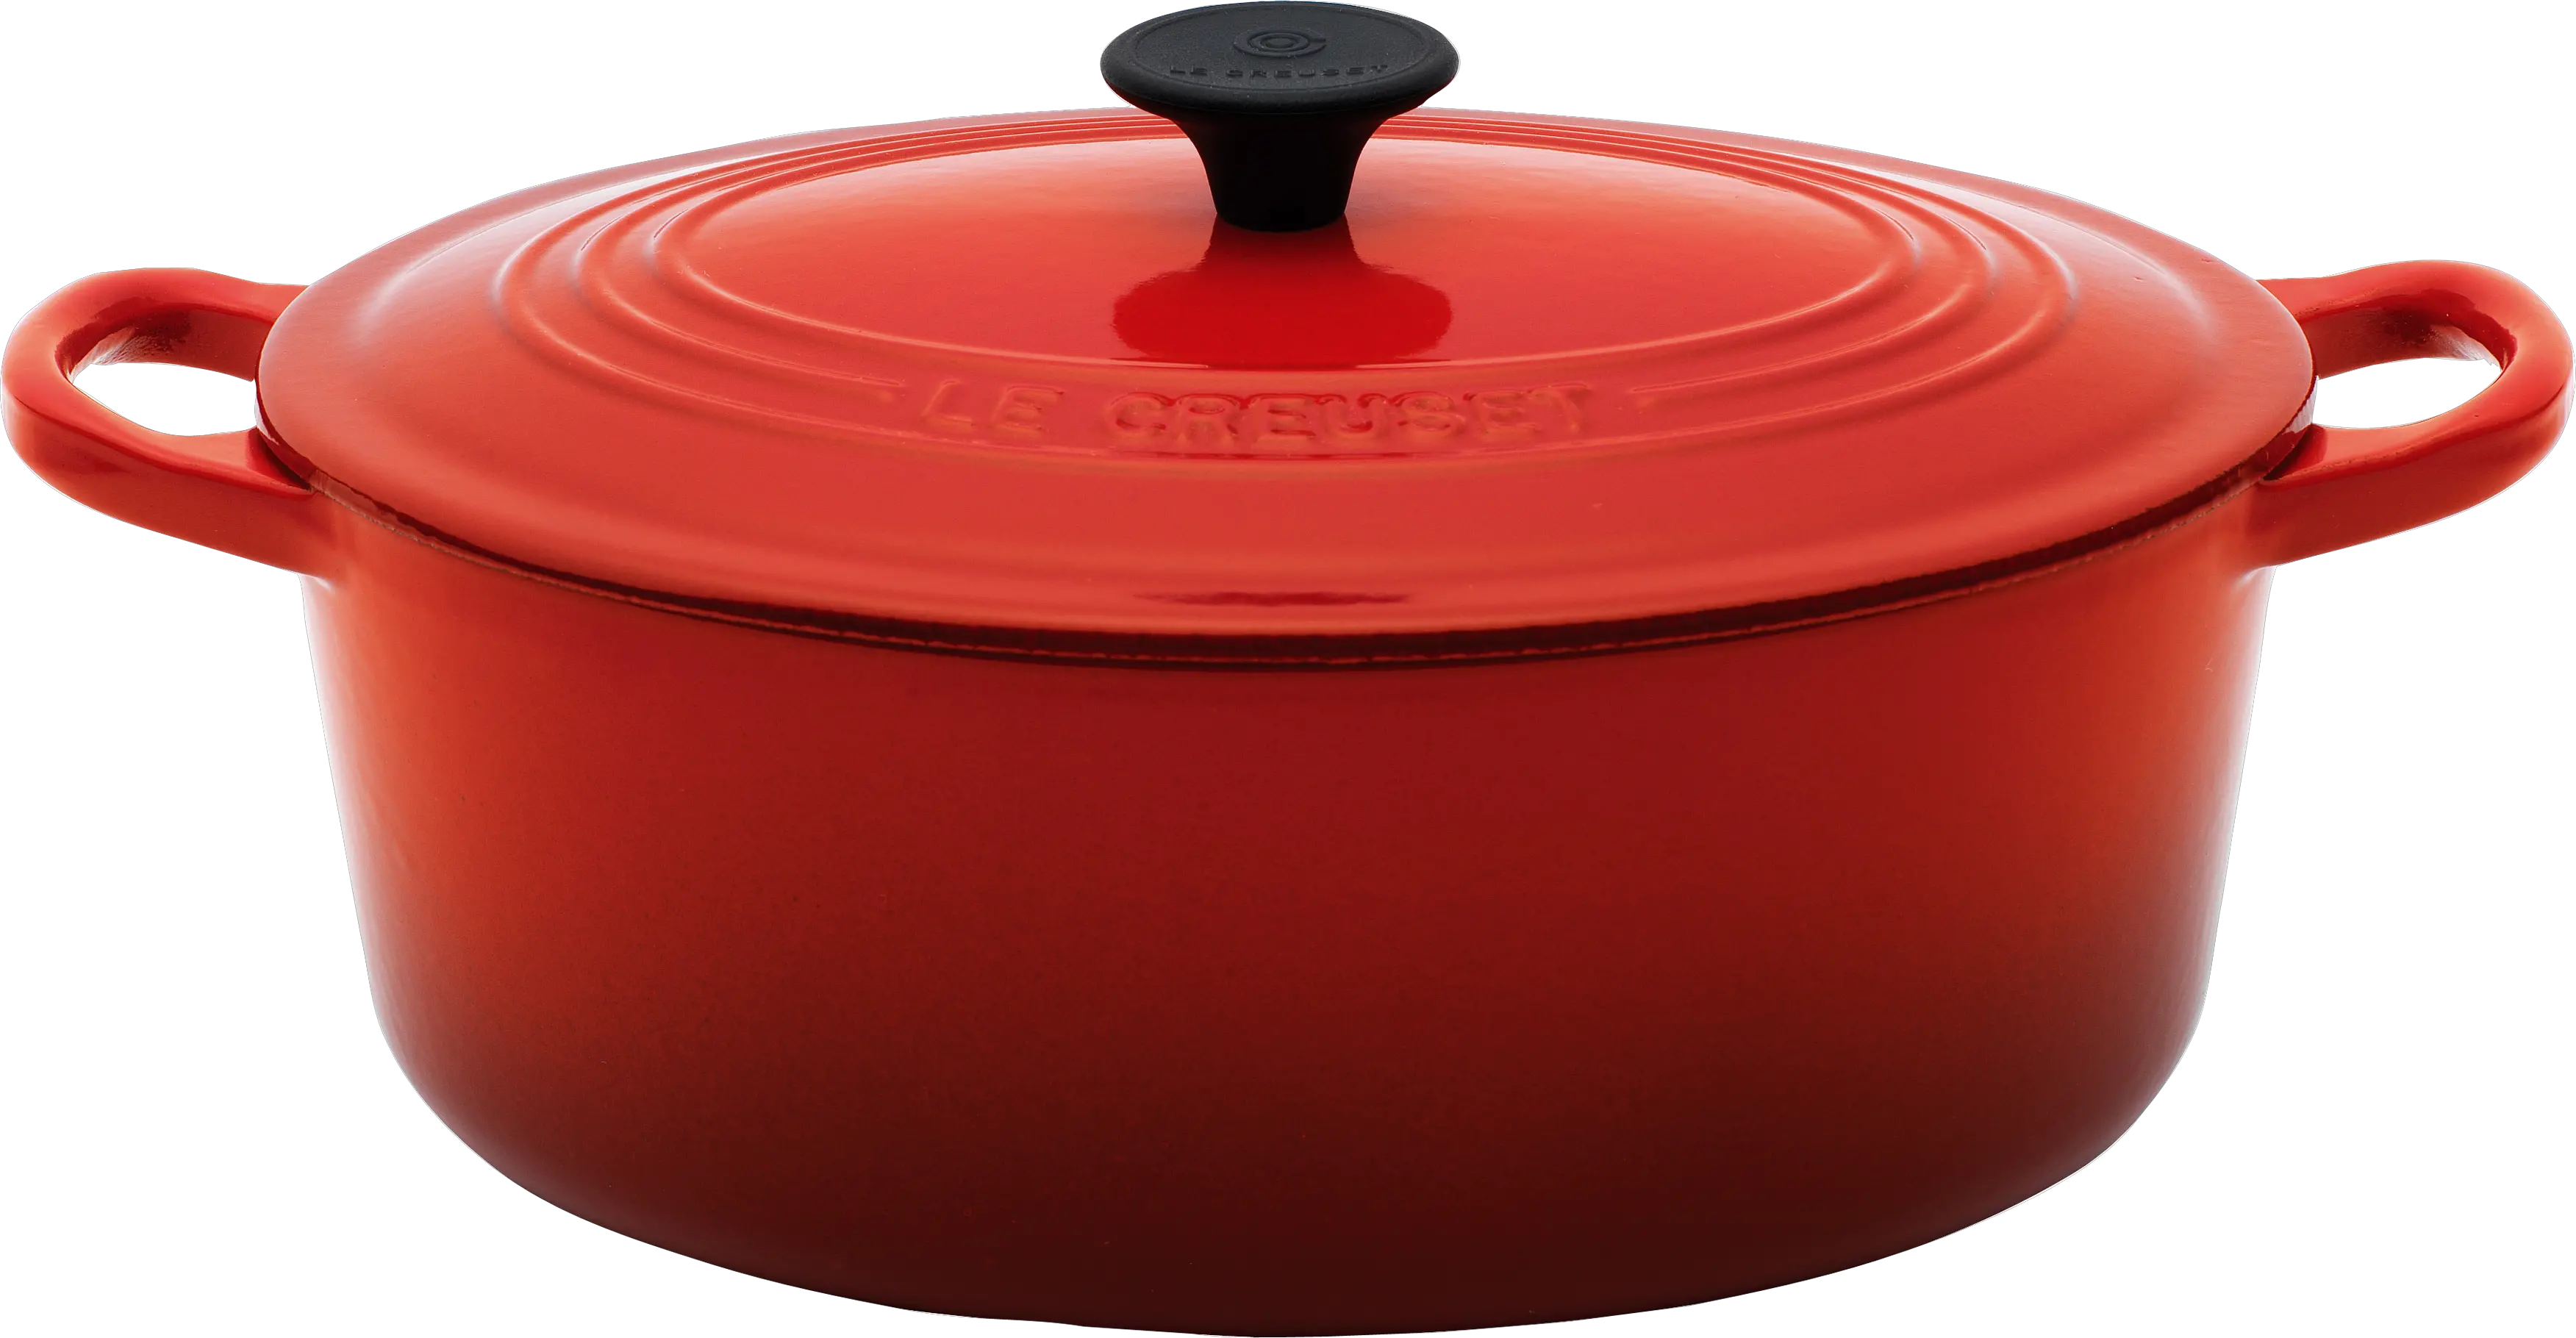 Download Cooking Pan Png Image For Free Le Creuset Dutch Oven Png Transparent Pan Png